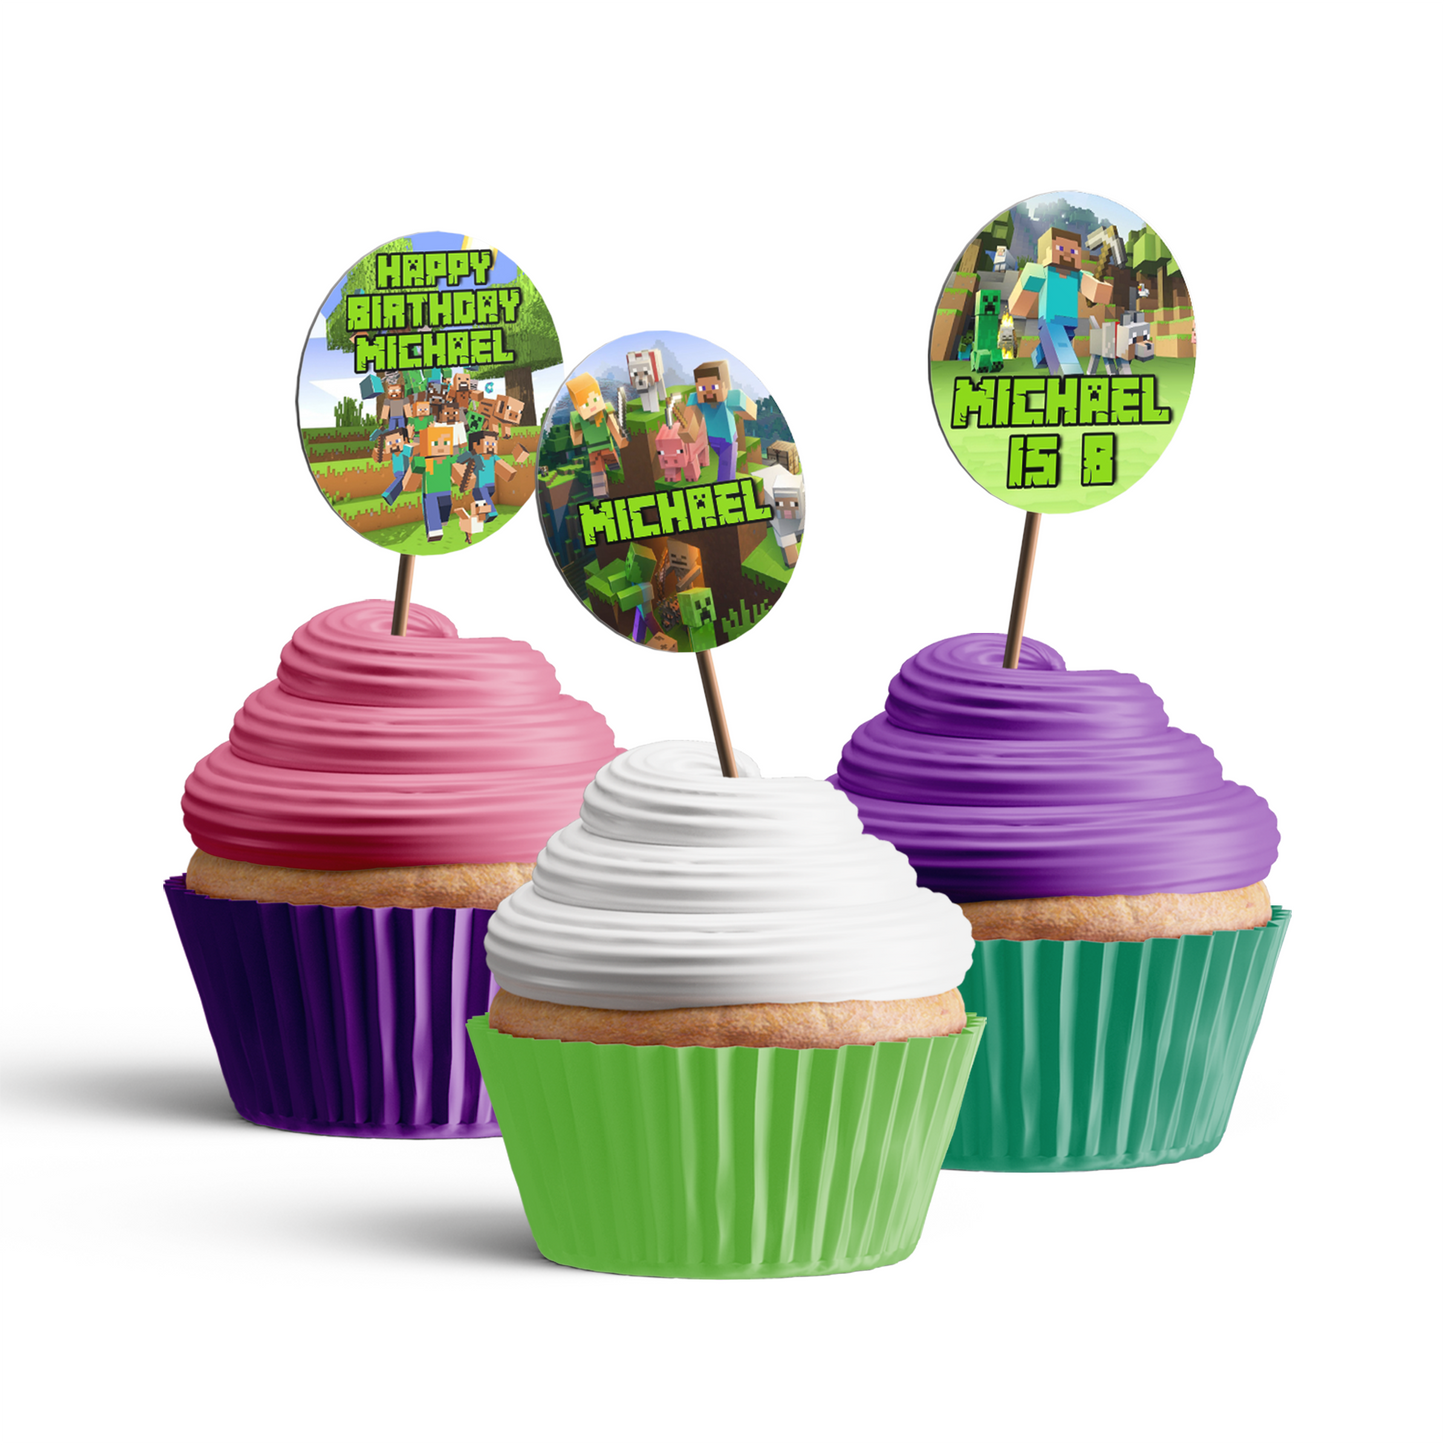 Minecraft Personalized Cupcakes Toppers, the perfect finishing touch